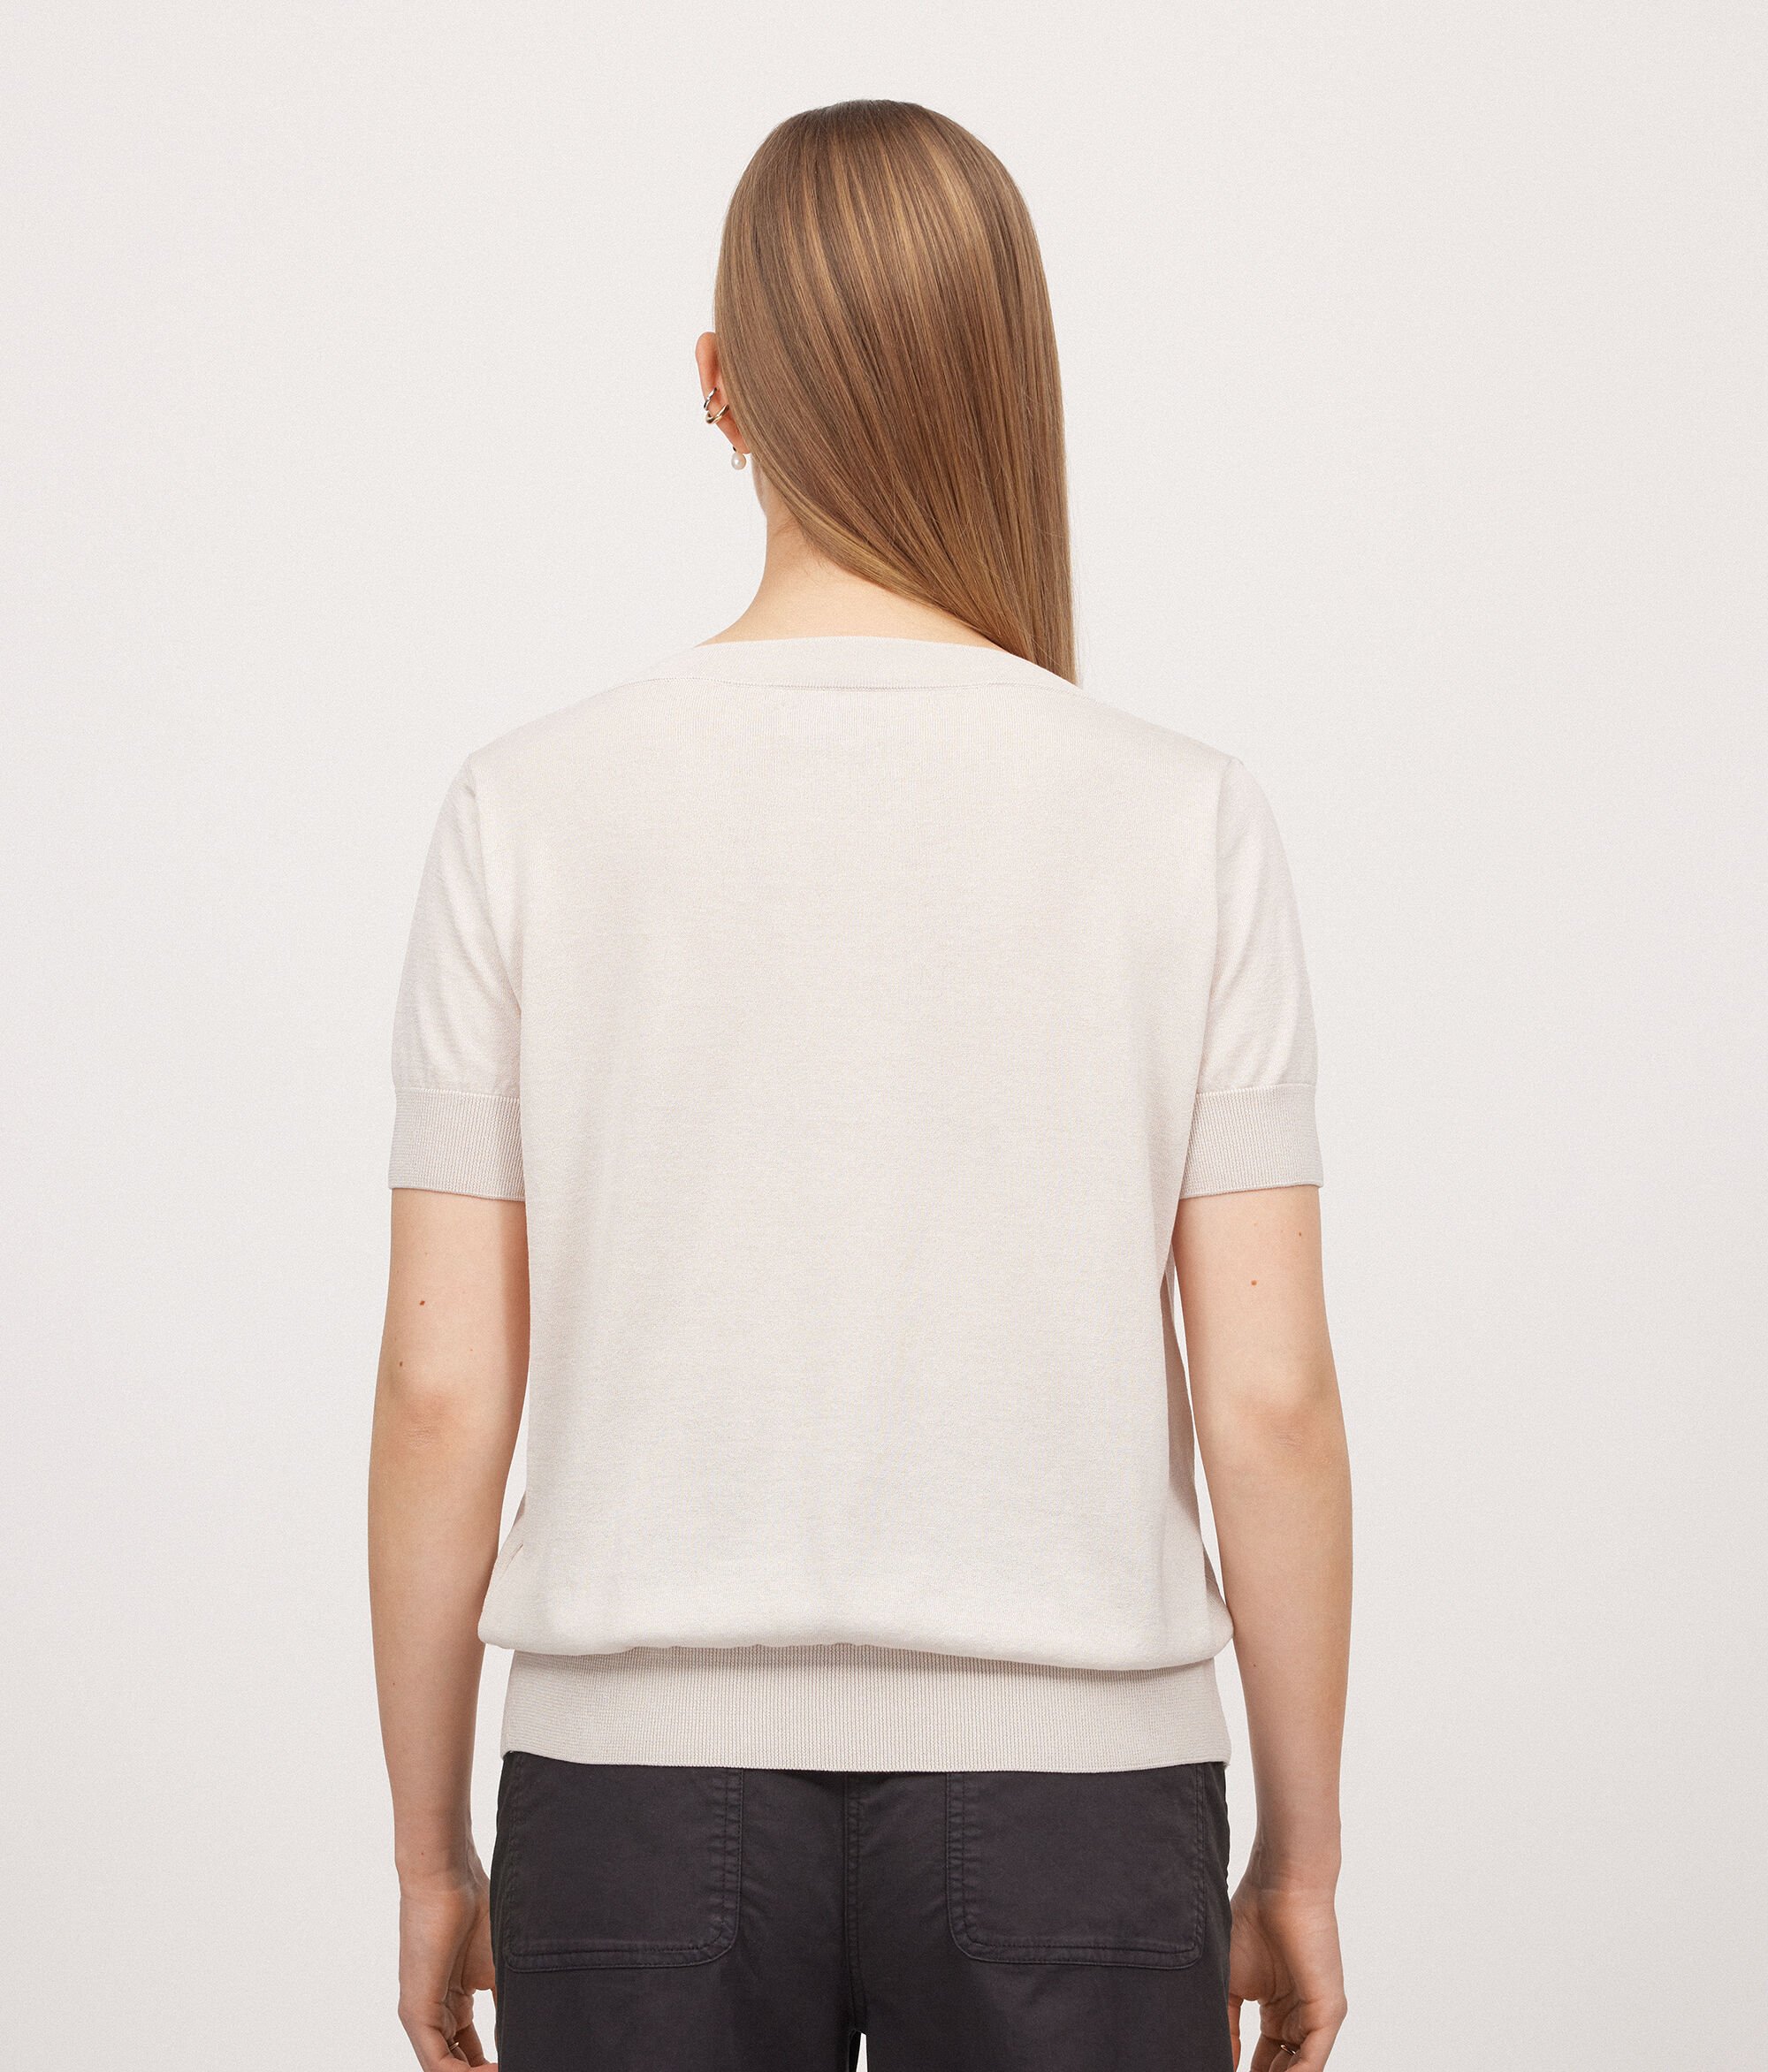 Silk and Cotton V-Neck Sweater with Short Sleeves